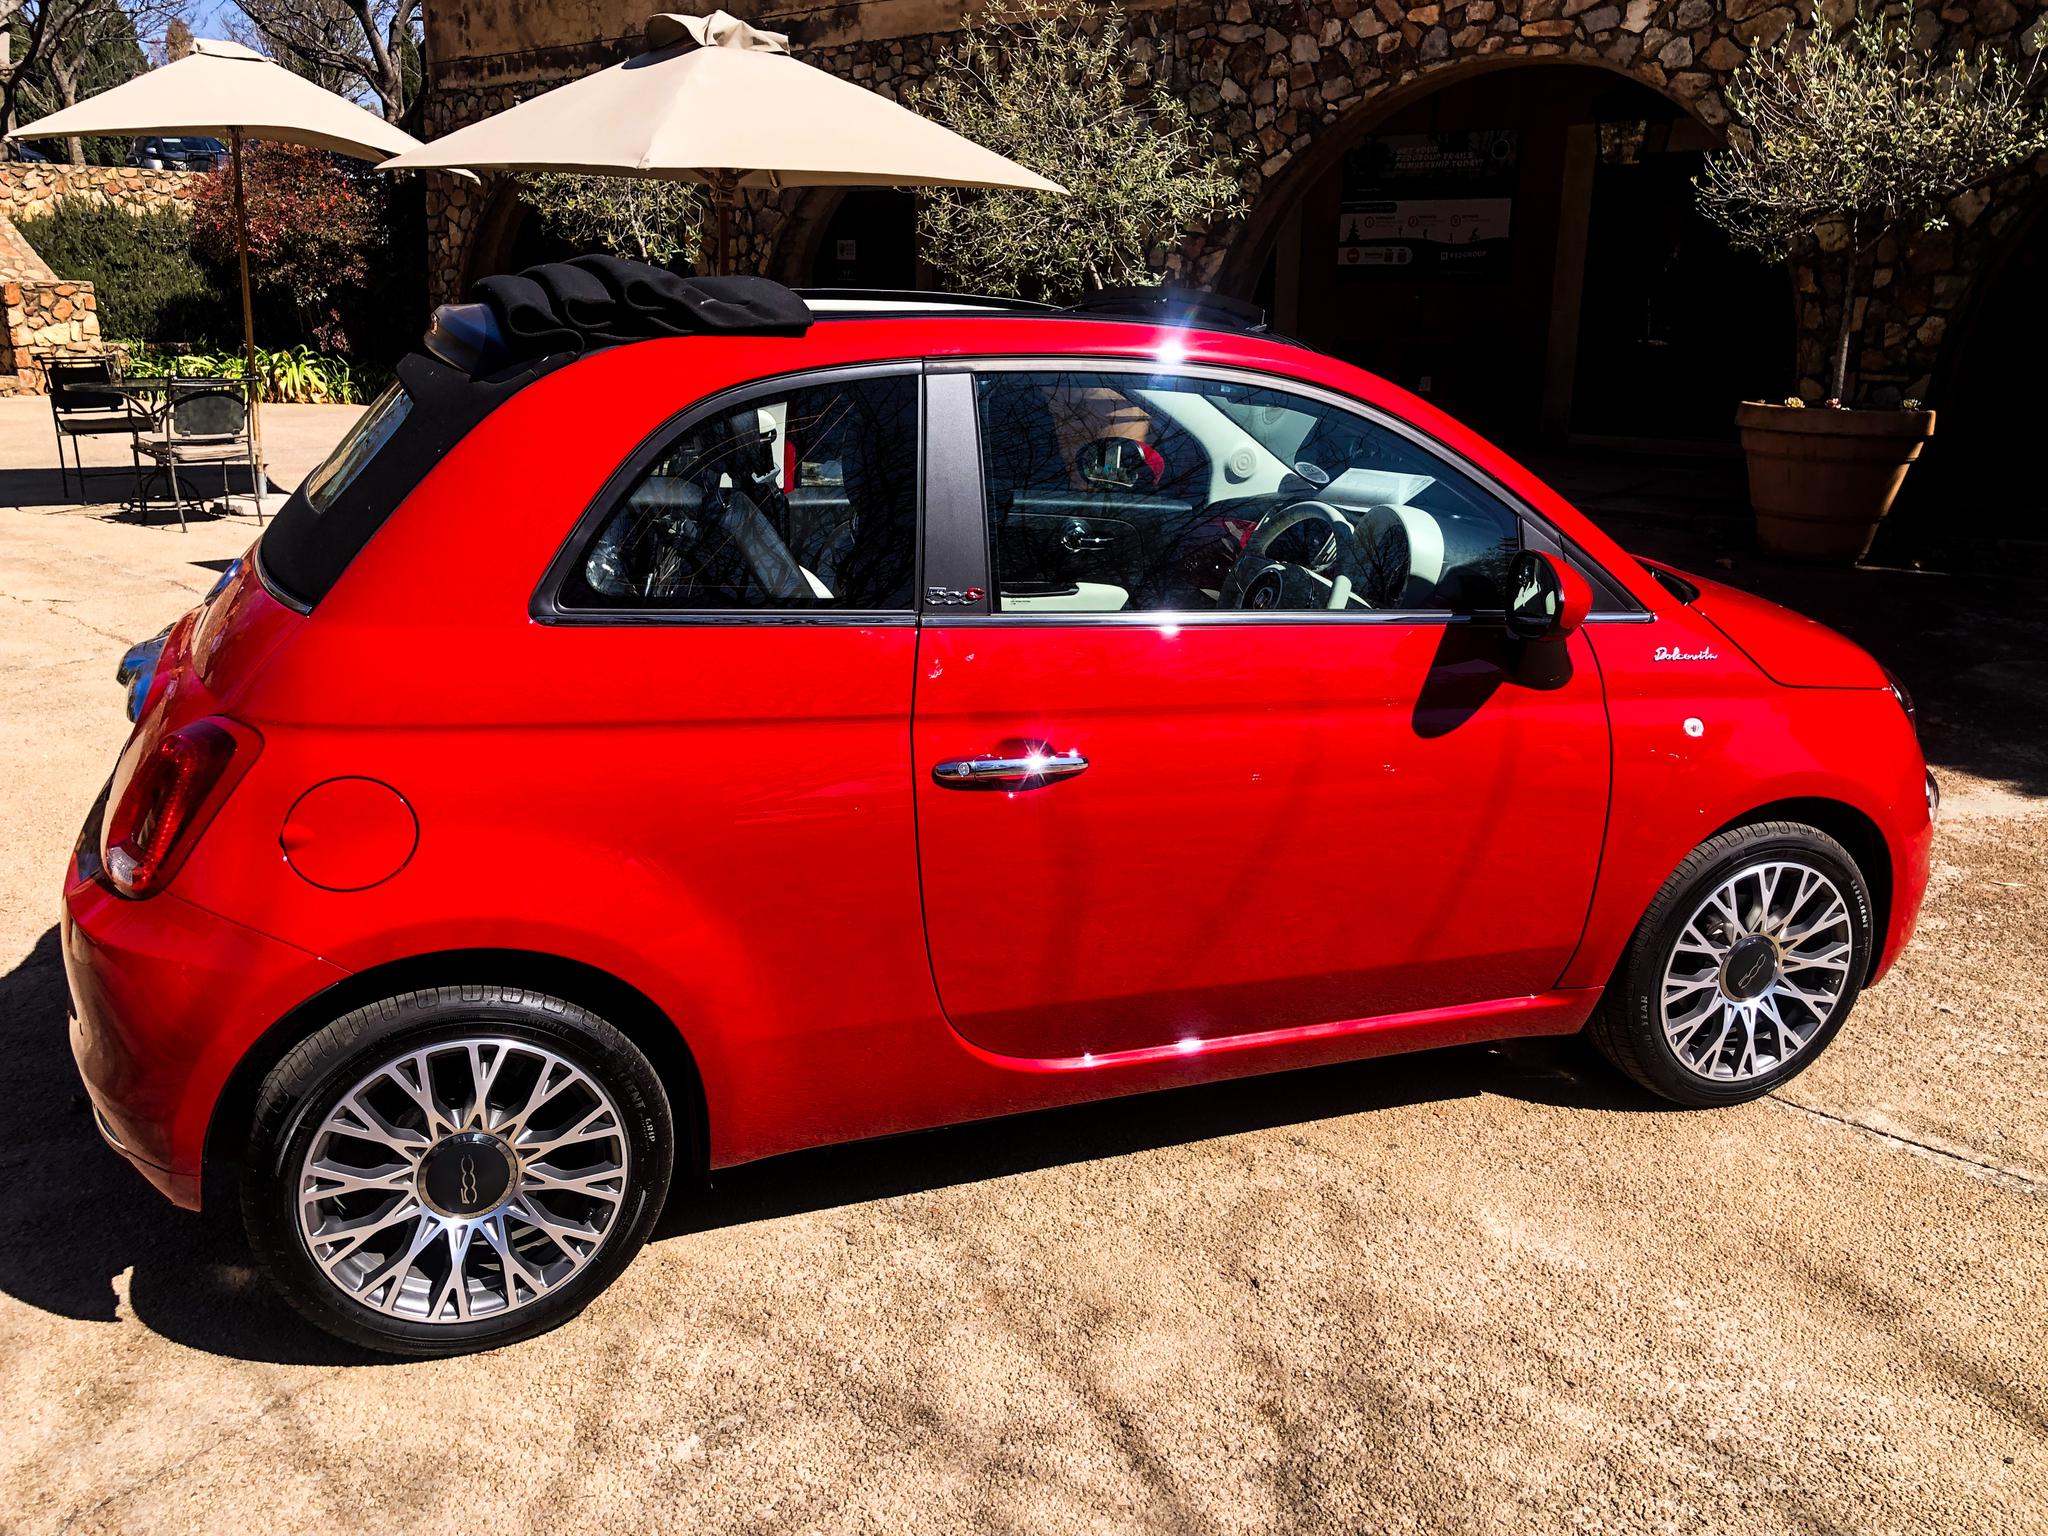 The refreshed Fiat 500 Dolcevita